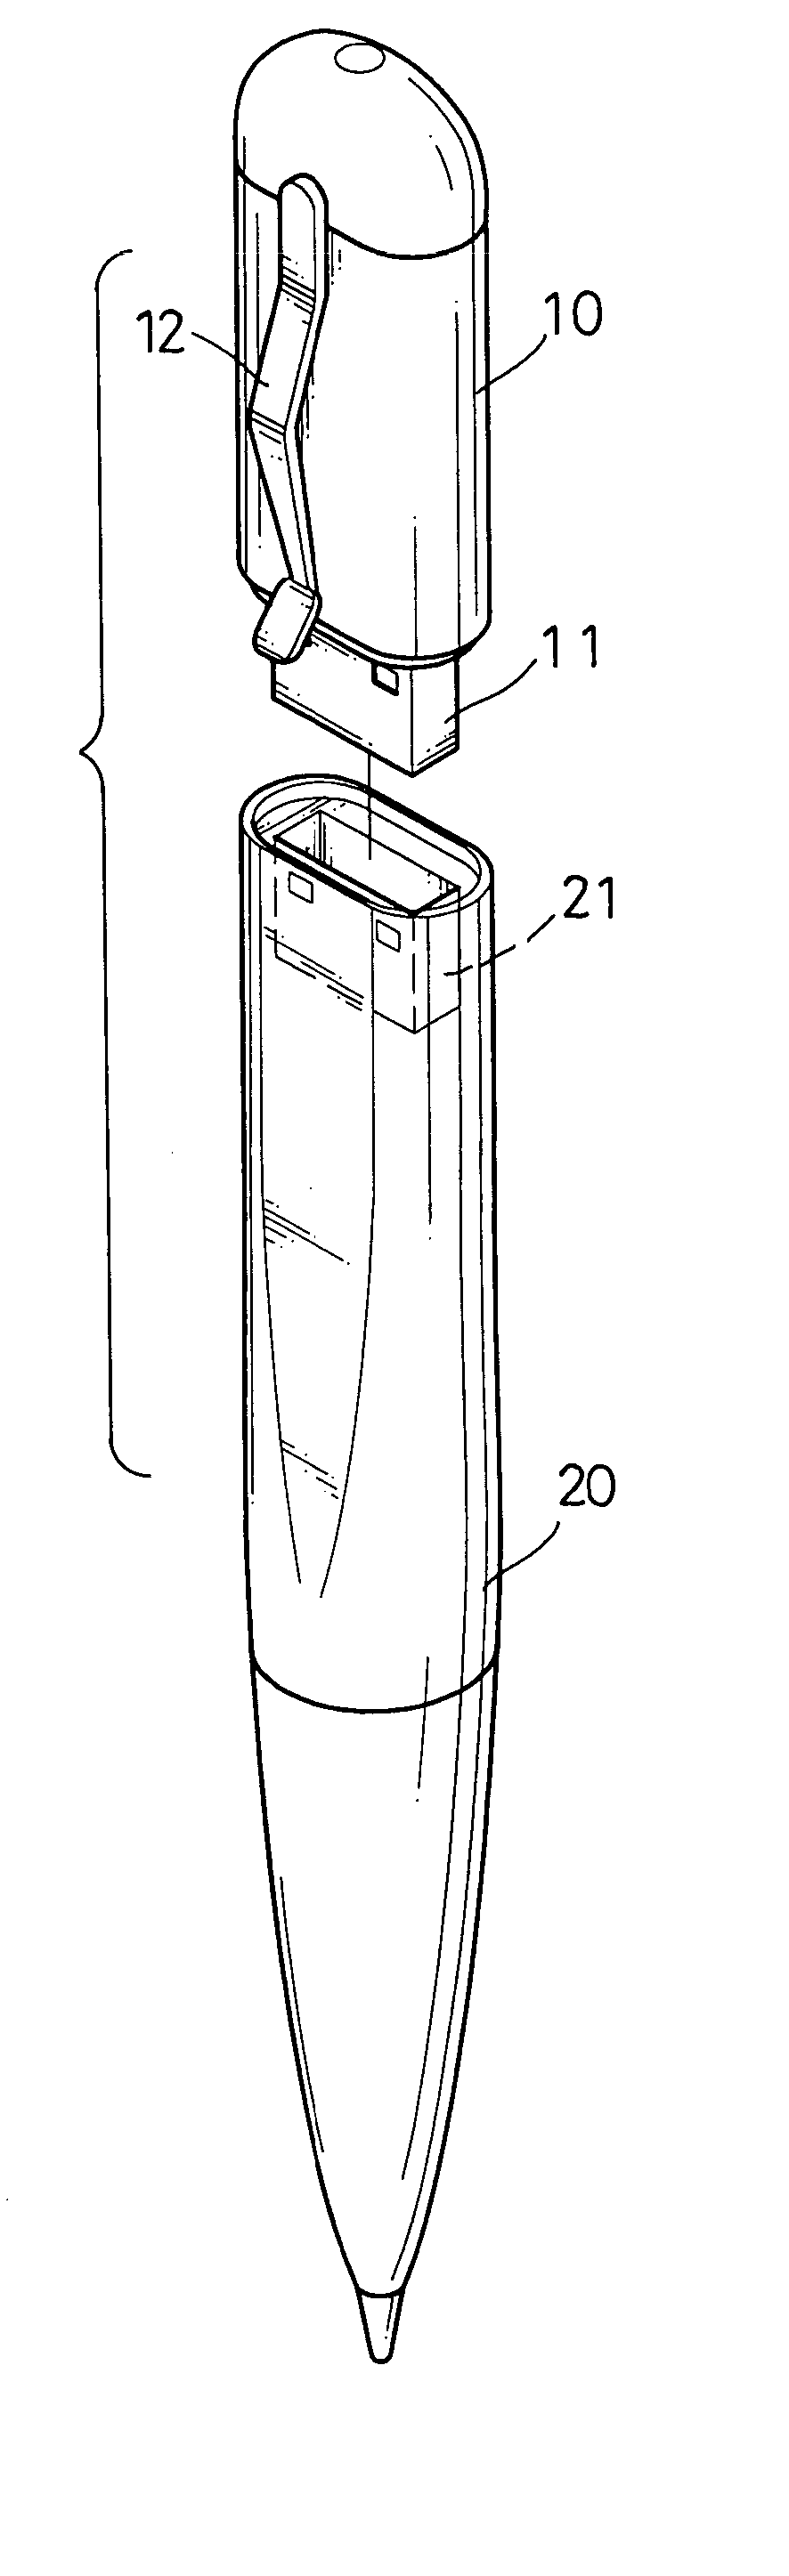 Writing instrument with a storage device